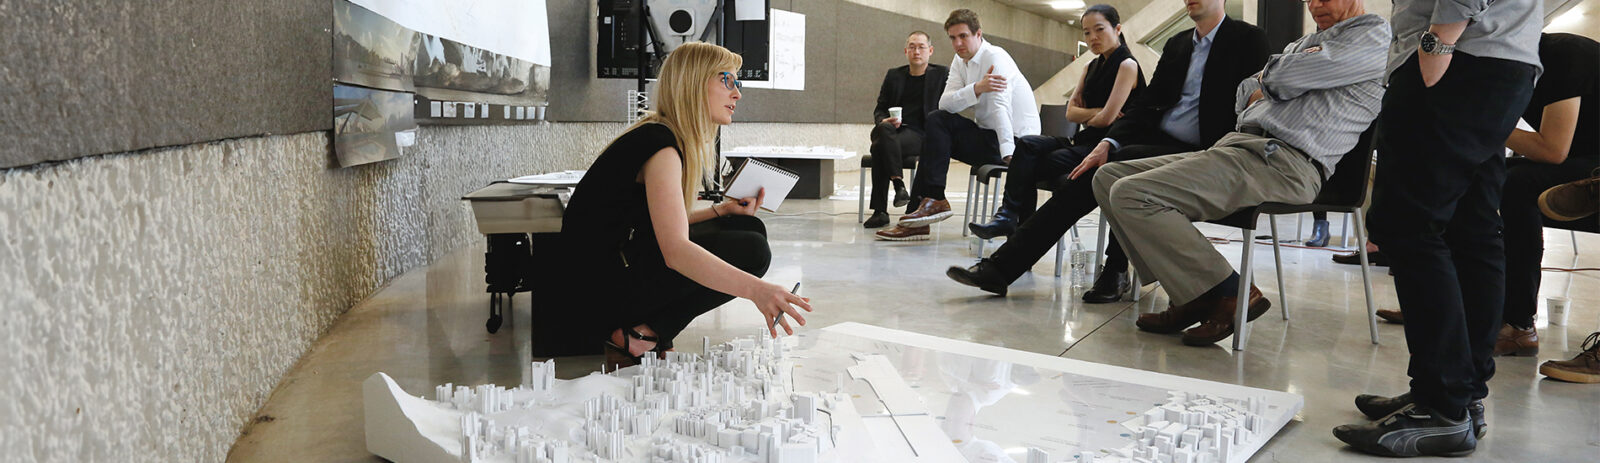 Professor bent down talking to forum of people in chairs presenting a white city model on the floor